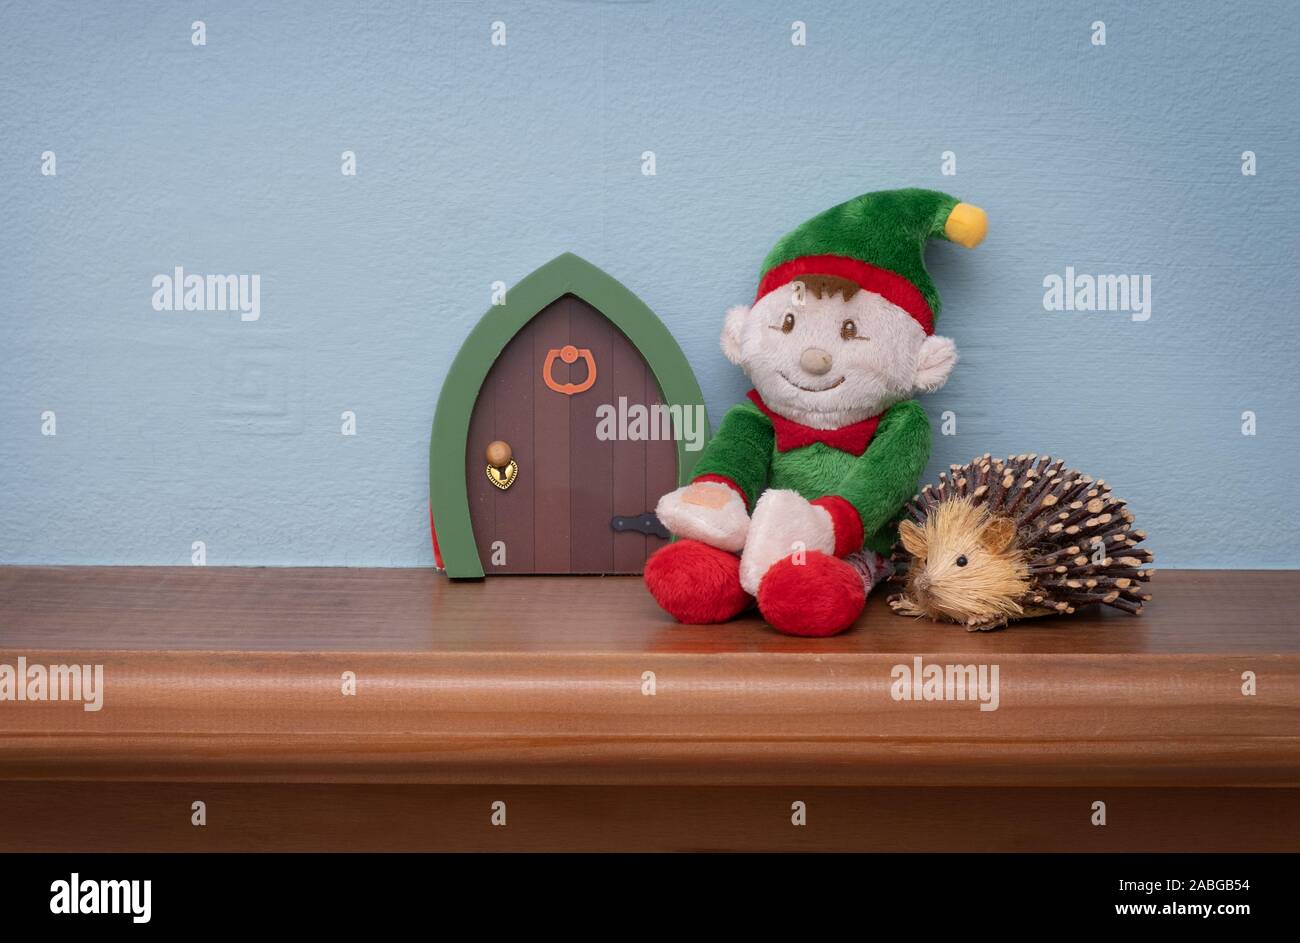 Christmas elf sitting next to elf door with toy hedgehog. Cute tradition of sending Santa's elf to check up on children just before christmas. Stock Photo